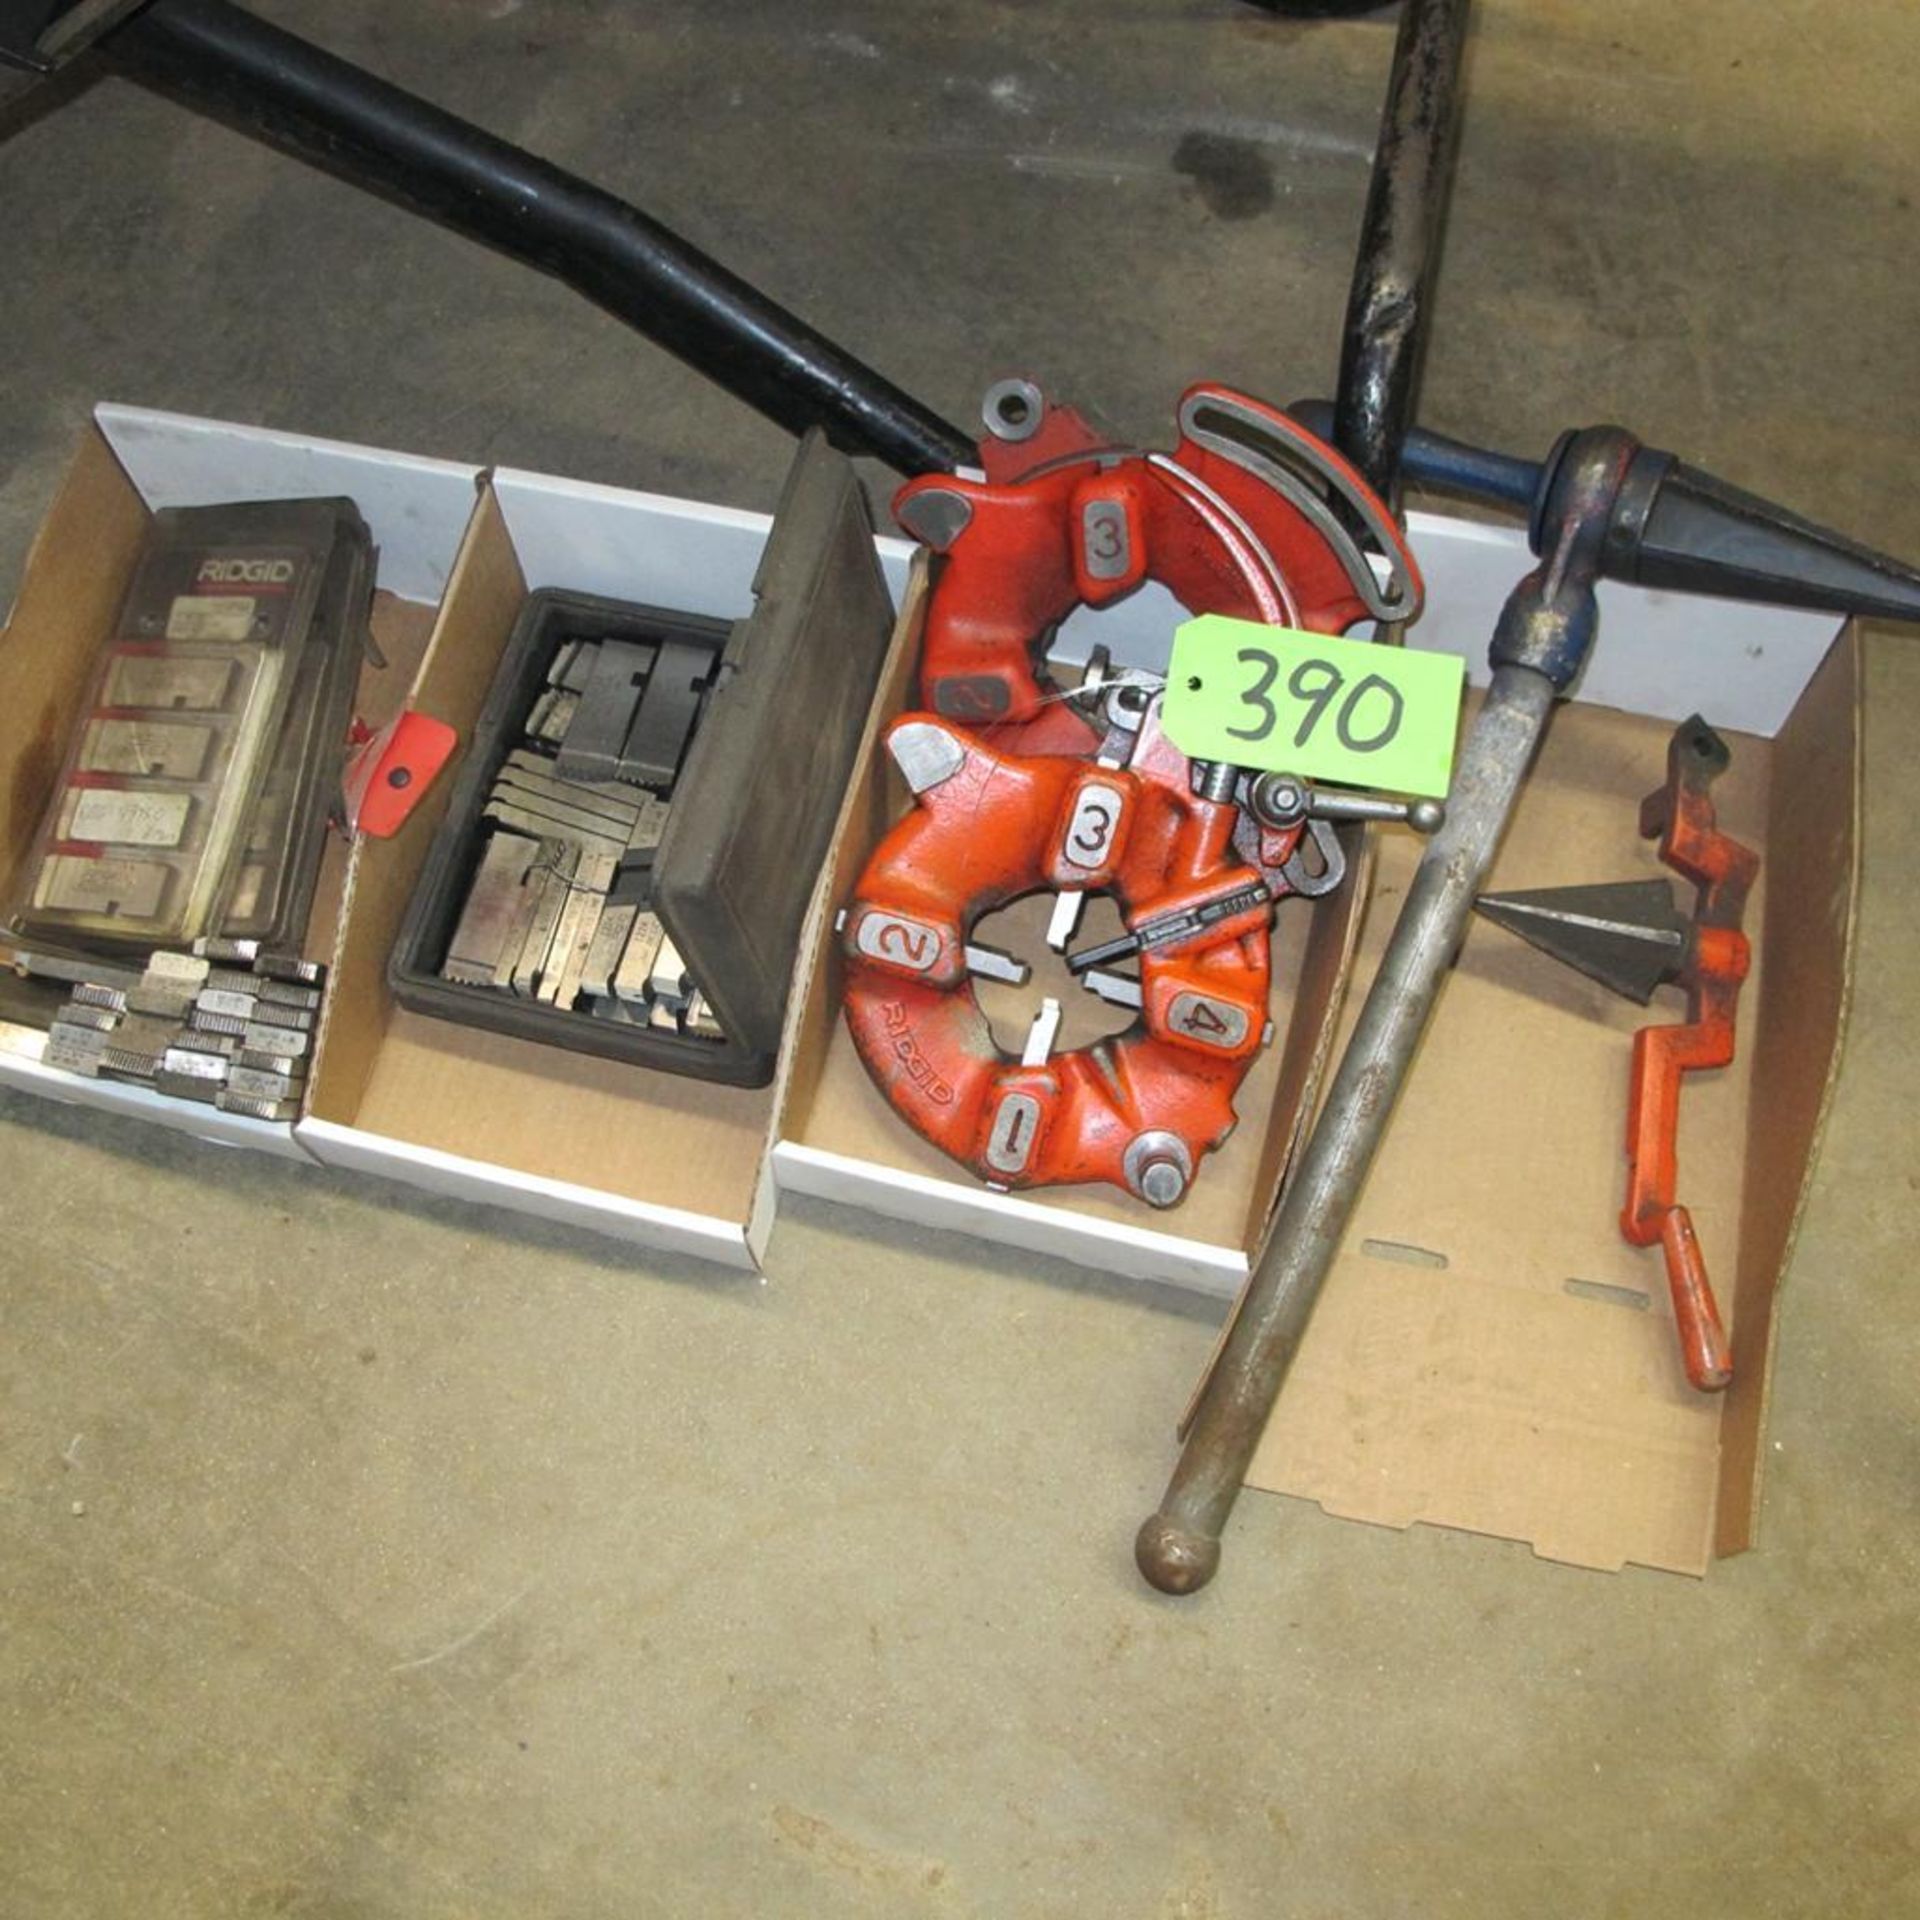 LOT OF 4 BOXES OF RIDGID PIPE DIES, HOLDERS AND ATTACHMENTS (WEST BLDG)